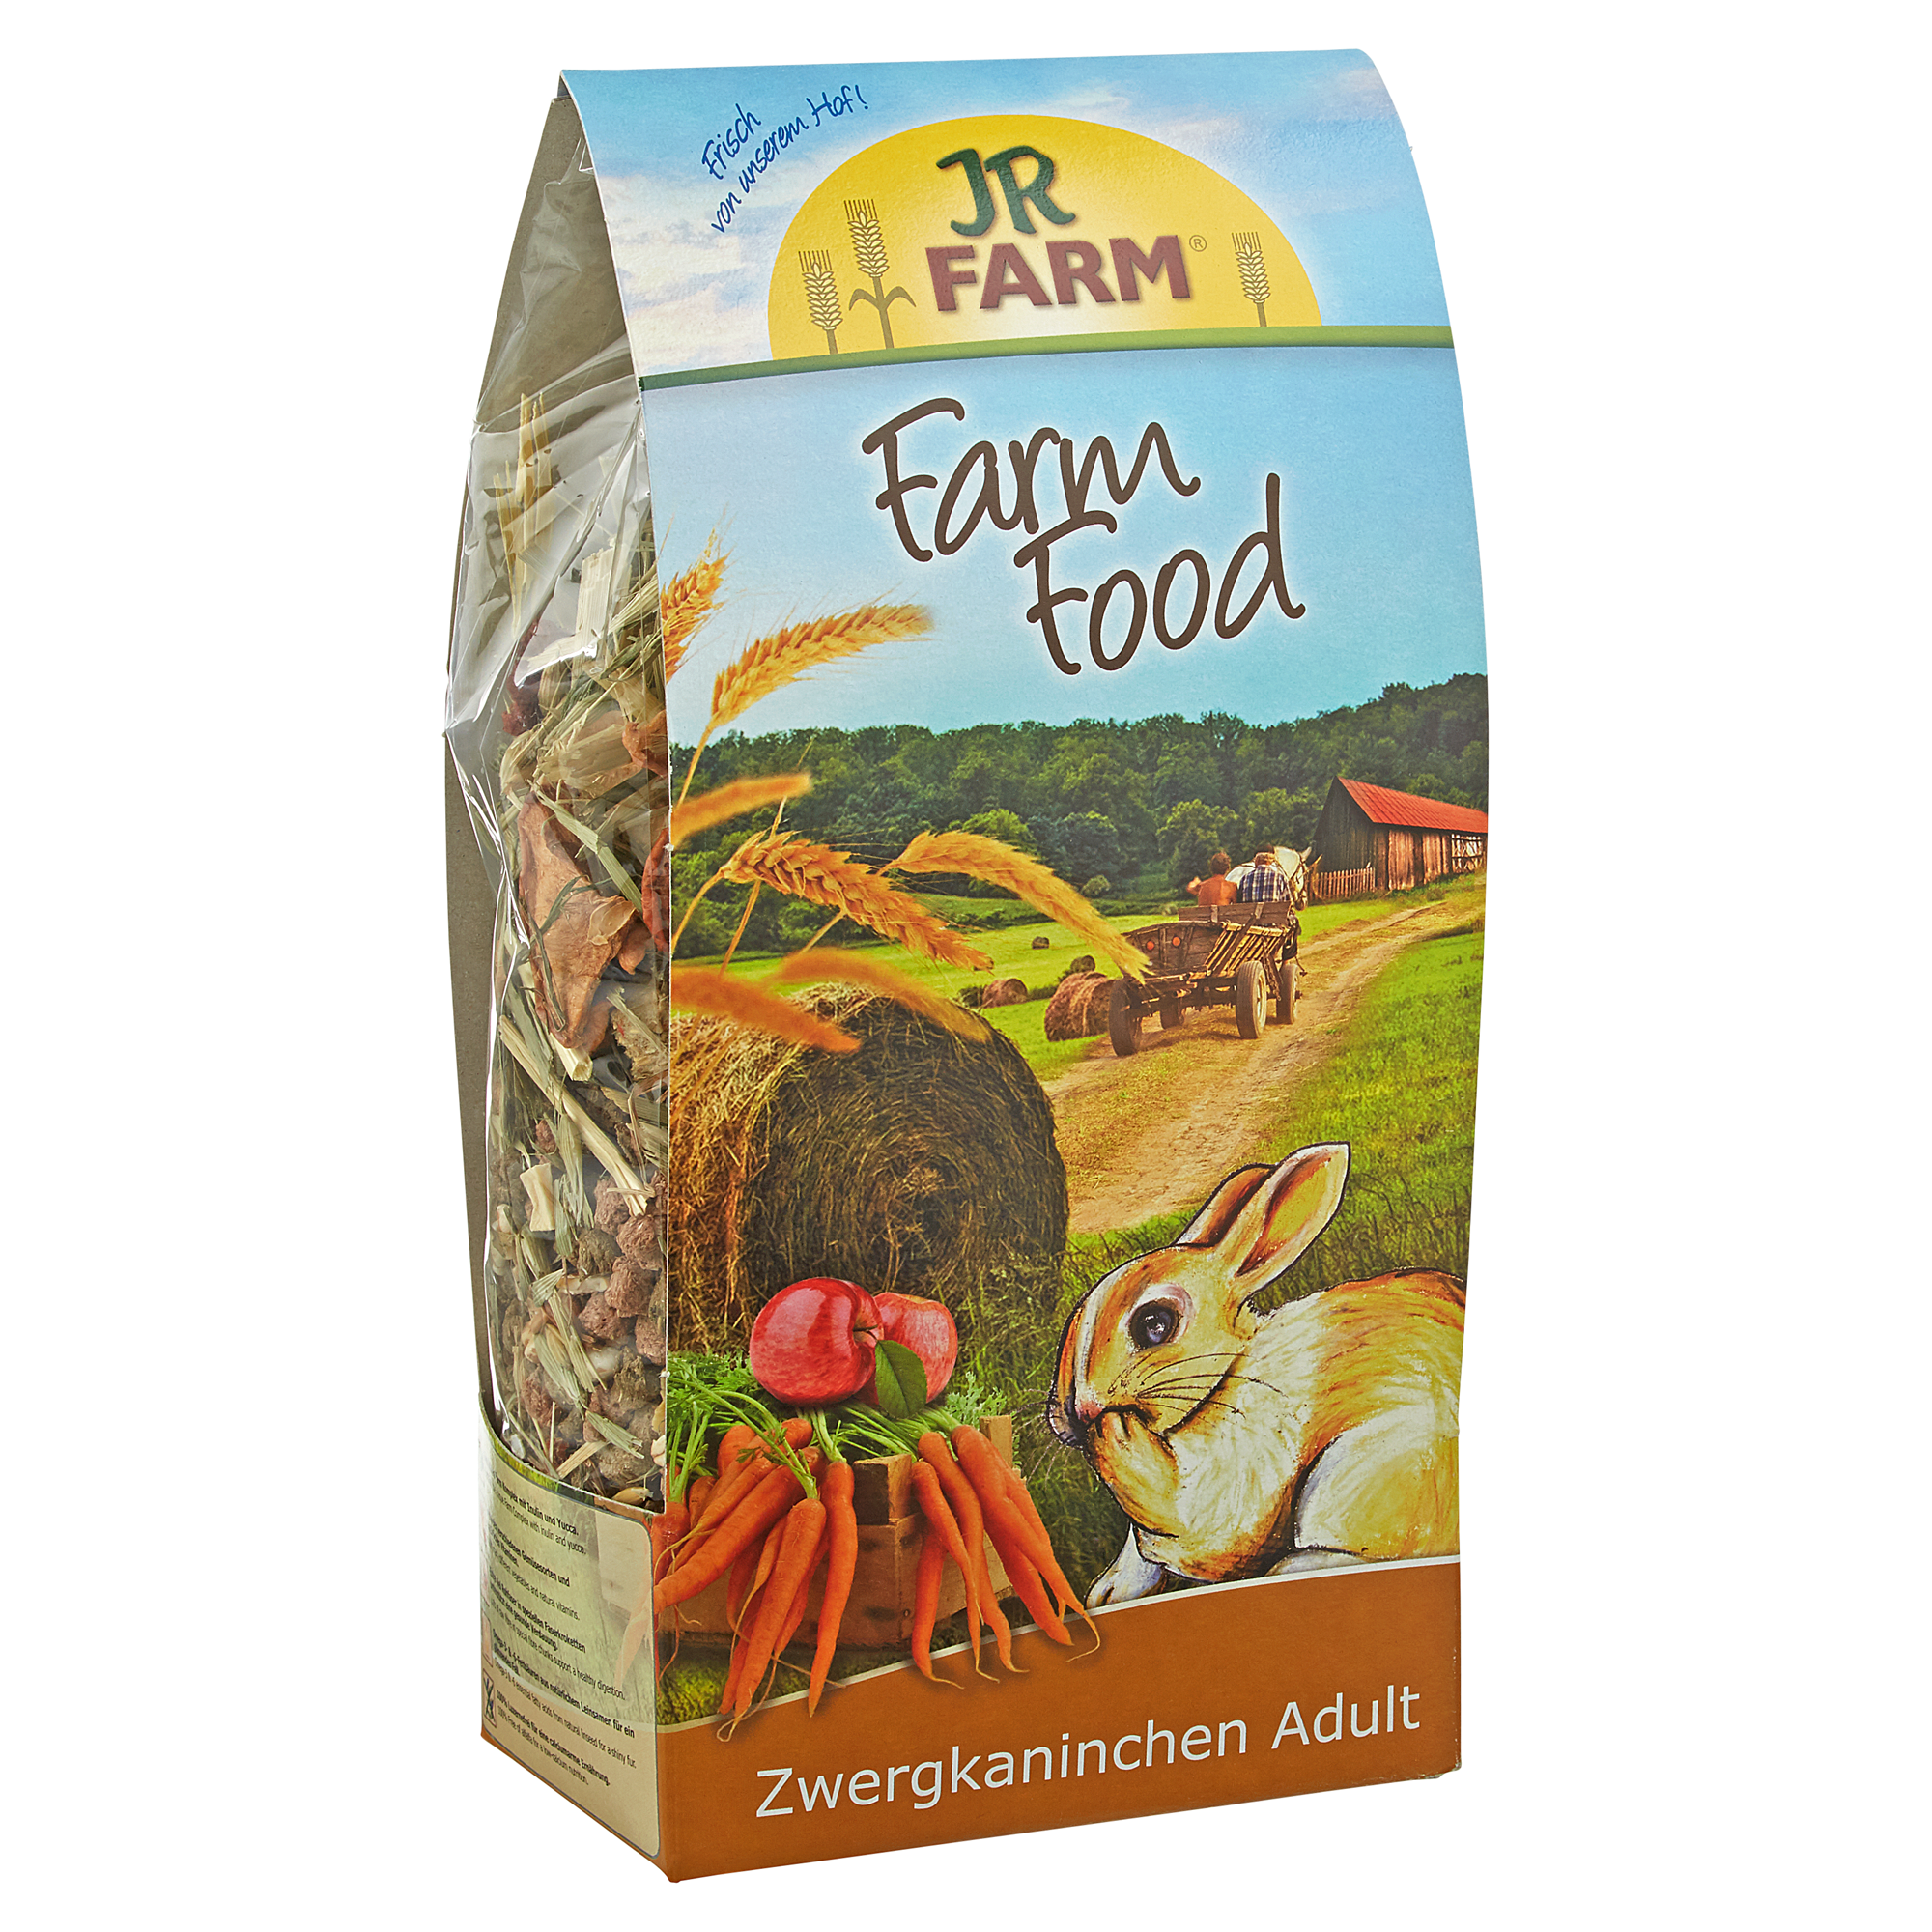 Zwergkaninchenfutter "Farm Food" Adult 750 g + product picture